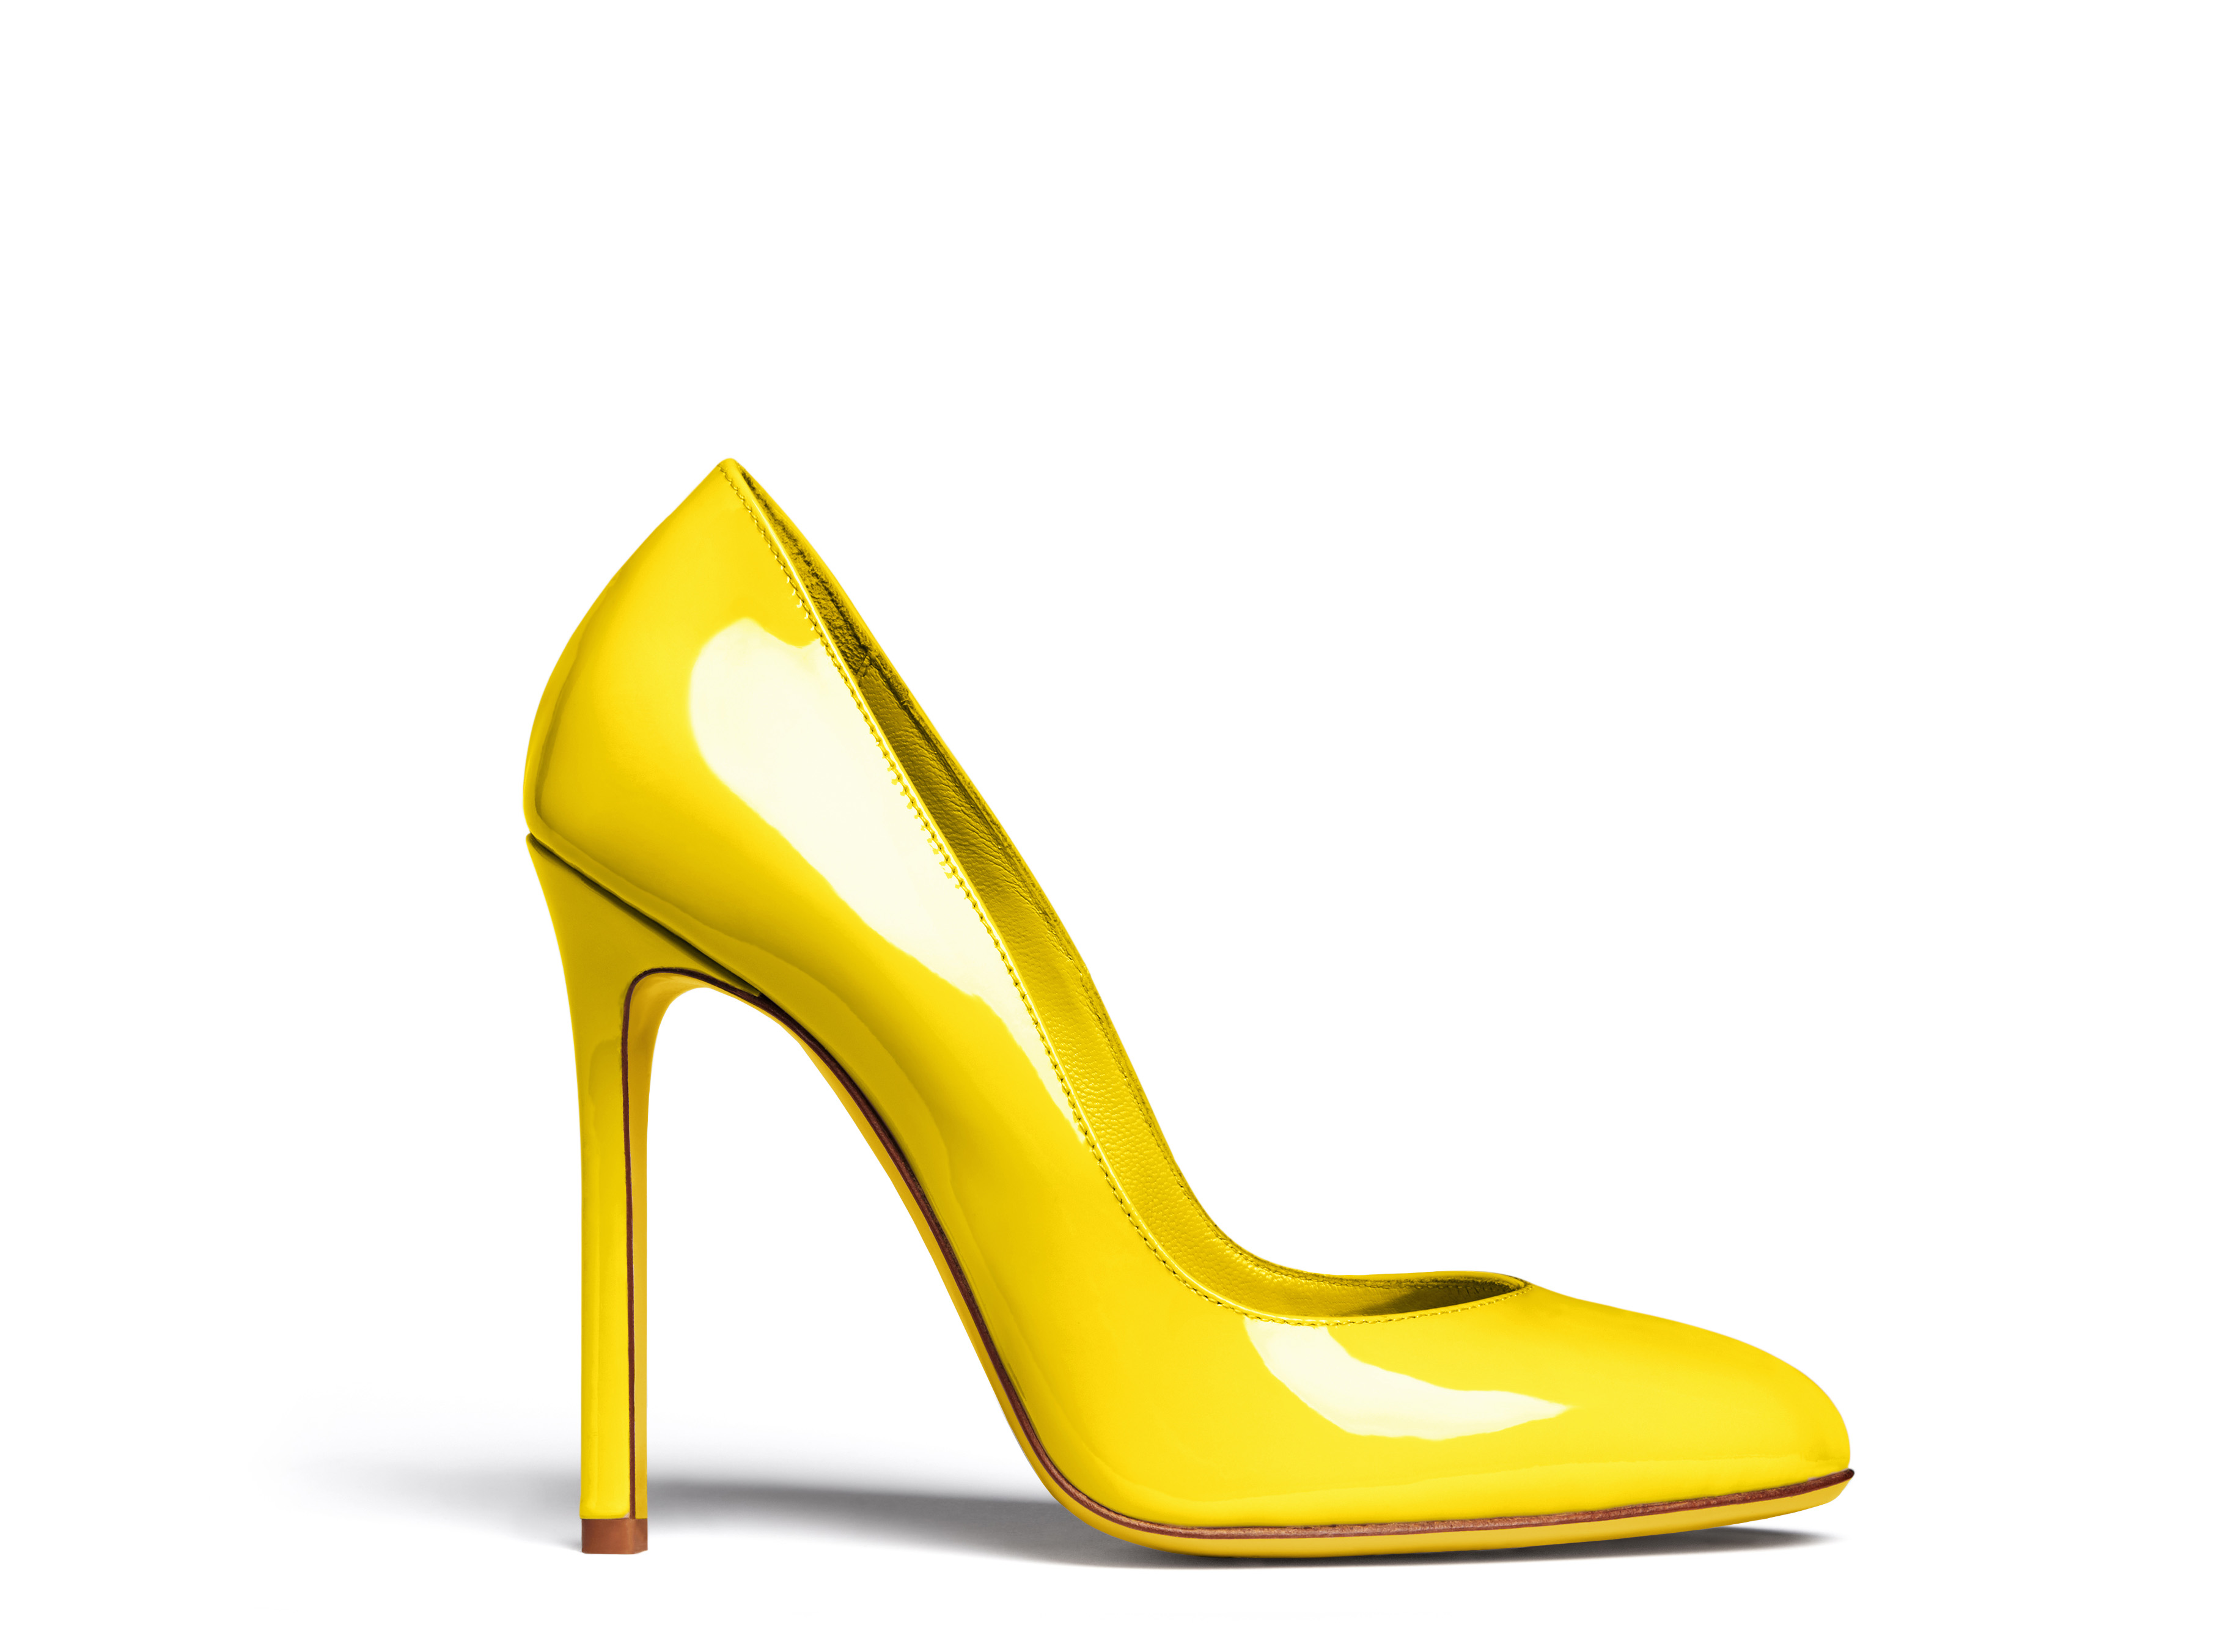 High Heels Sandals Green and Yellow Peep Toe Ankle Strap Sandal Women High  Heels Shoes - Milanoo.com